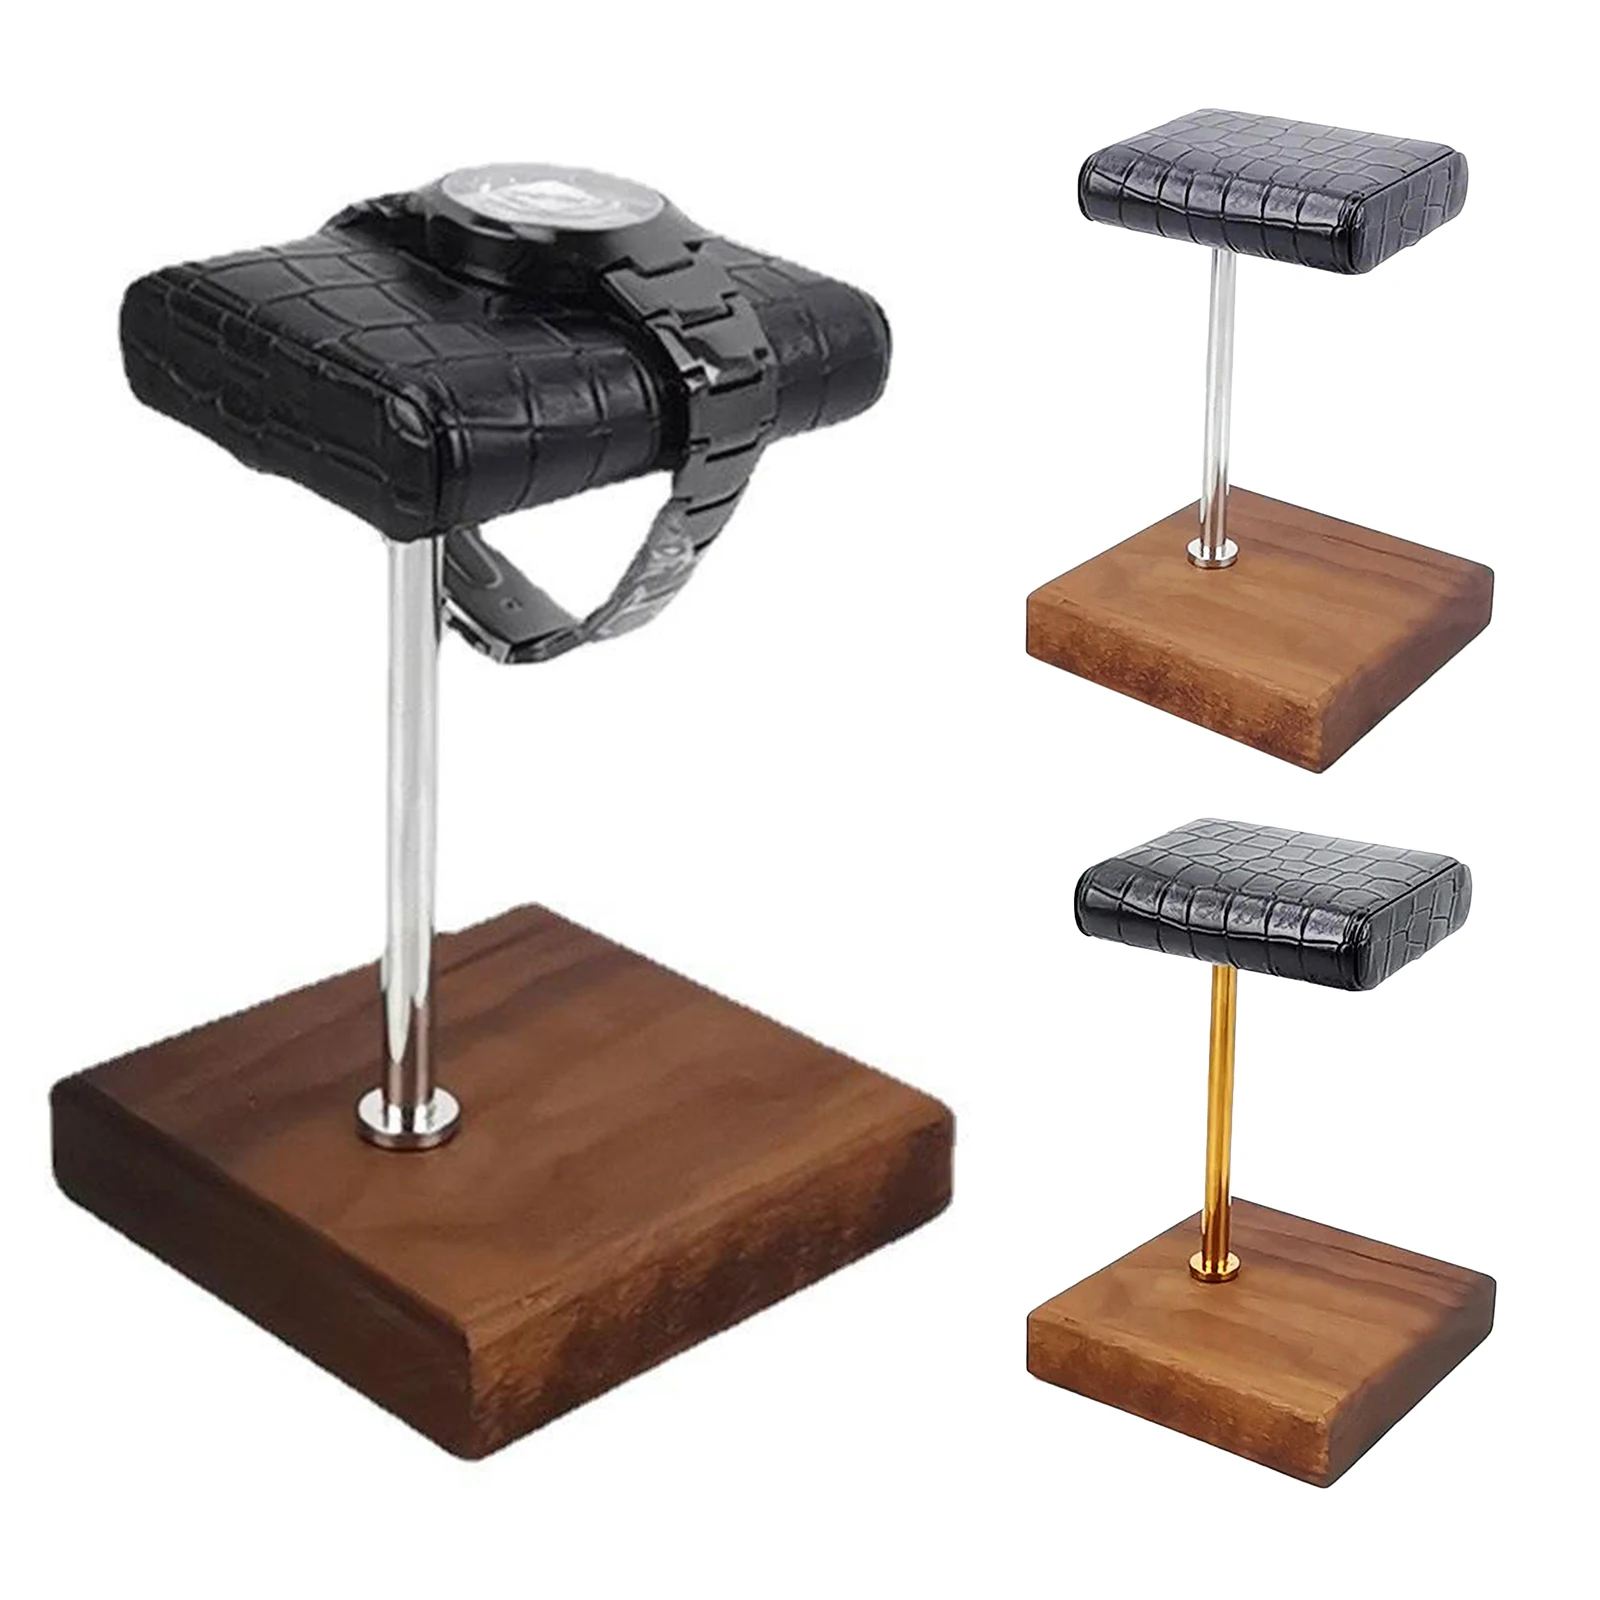 Watch display Stand | Handcrafted Leather Natural Marble base | Great Gift for Your Boyfriend, Husband, Father